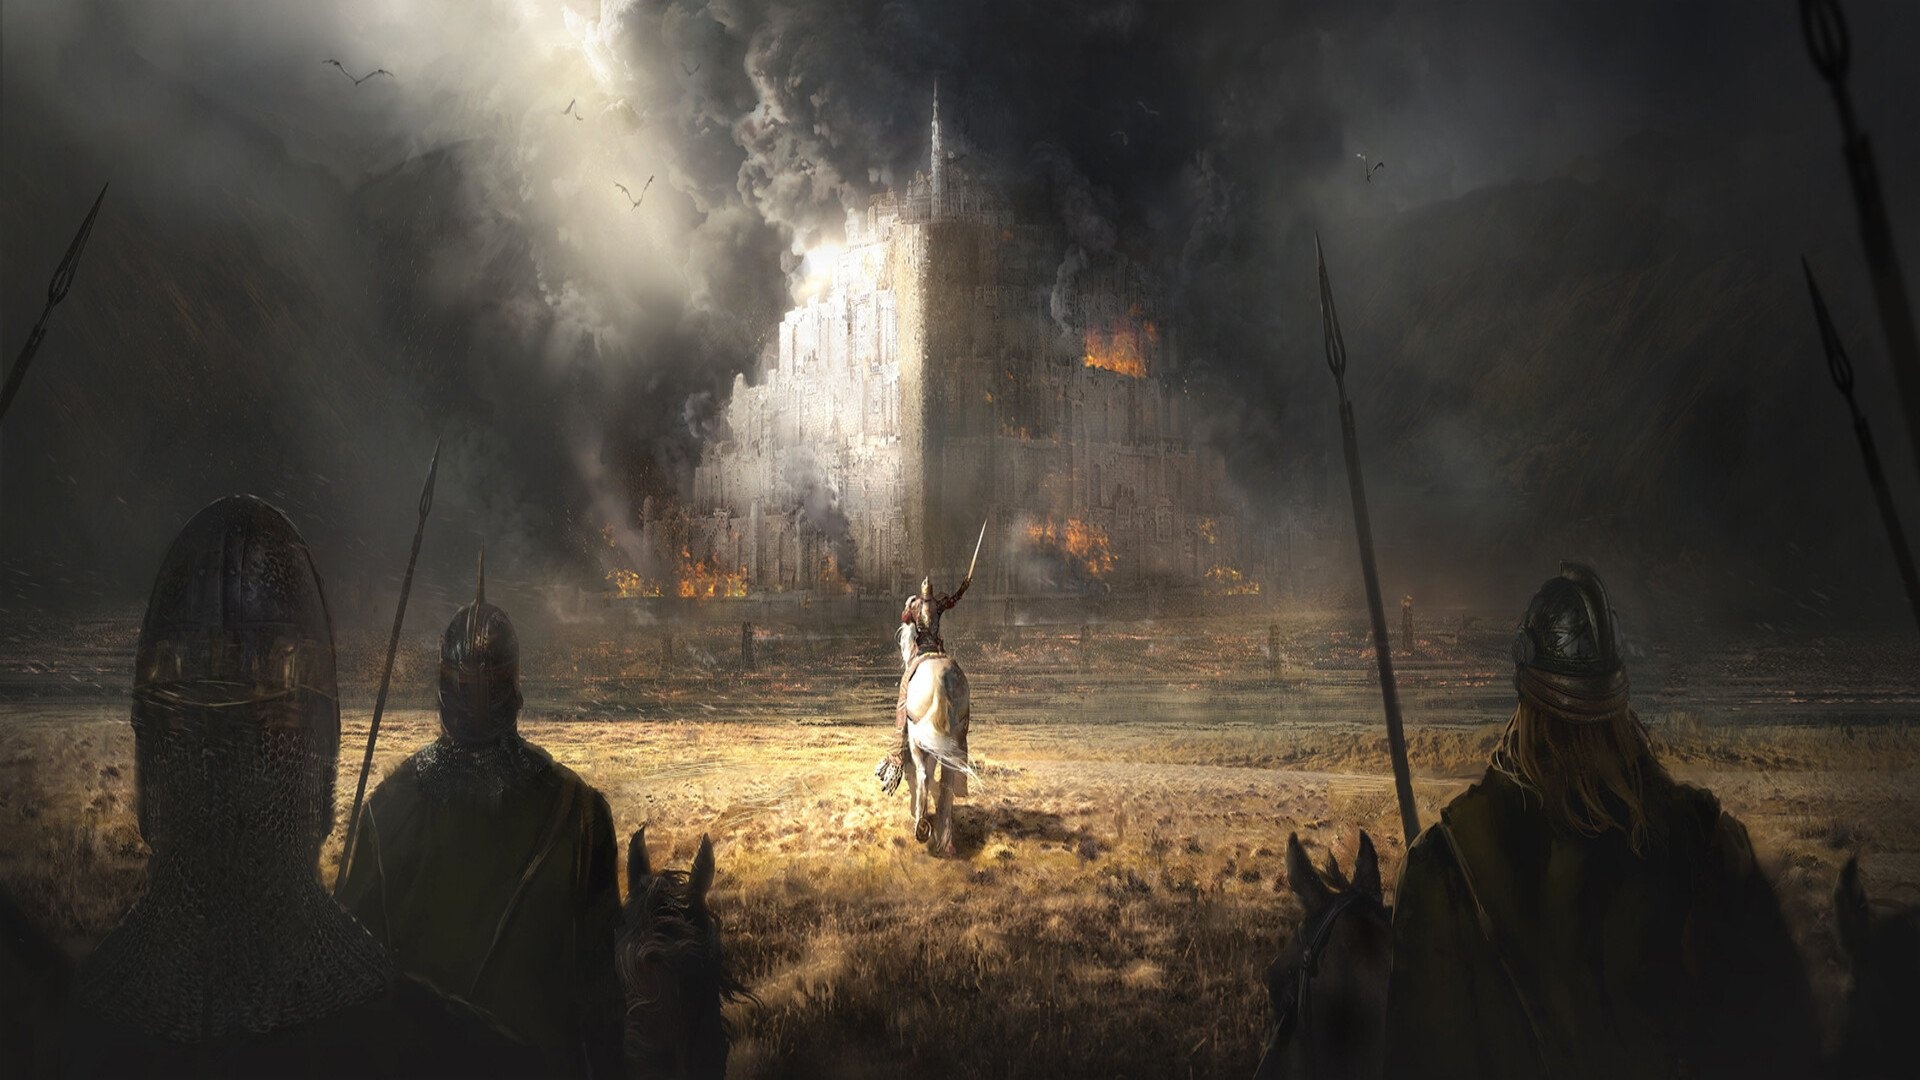 Gondor: Battle of the Pelennor Fields, The defense of the city of Minas Tirith, The largest battle in the War of the Ring. 1920x1080 Full HD Wallpaper.